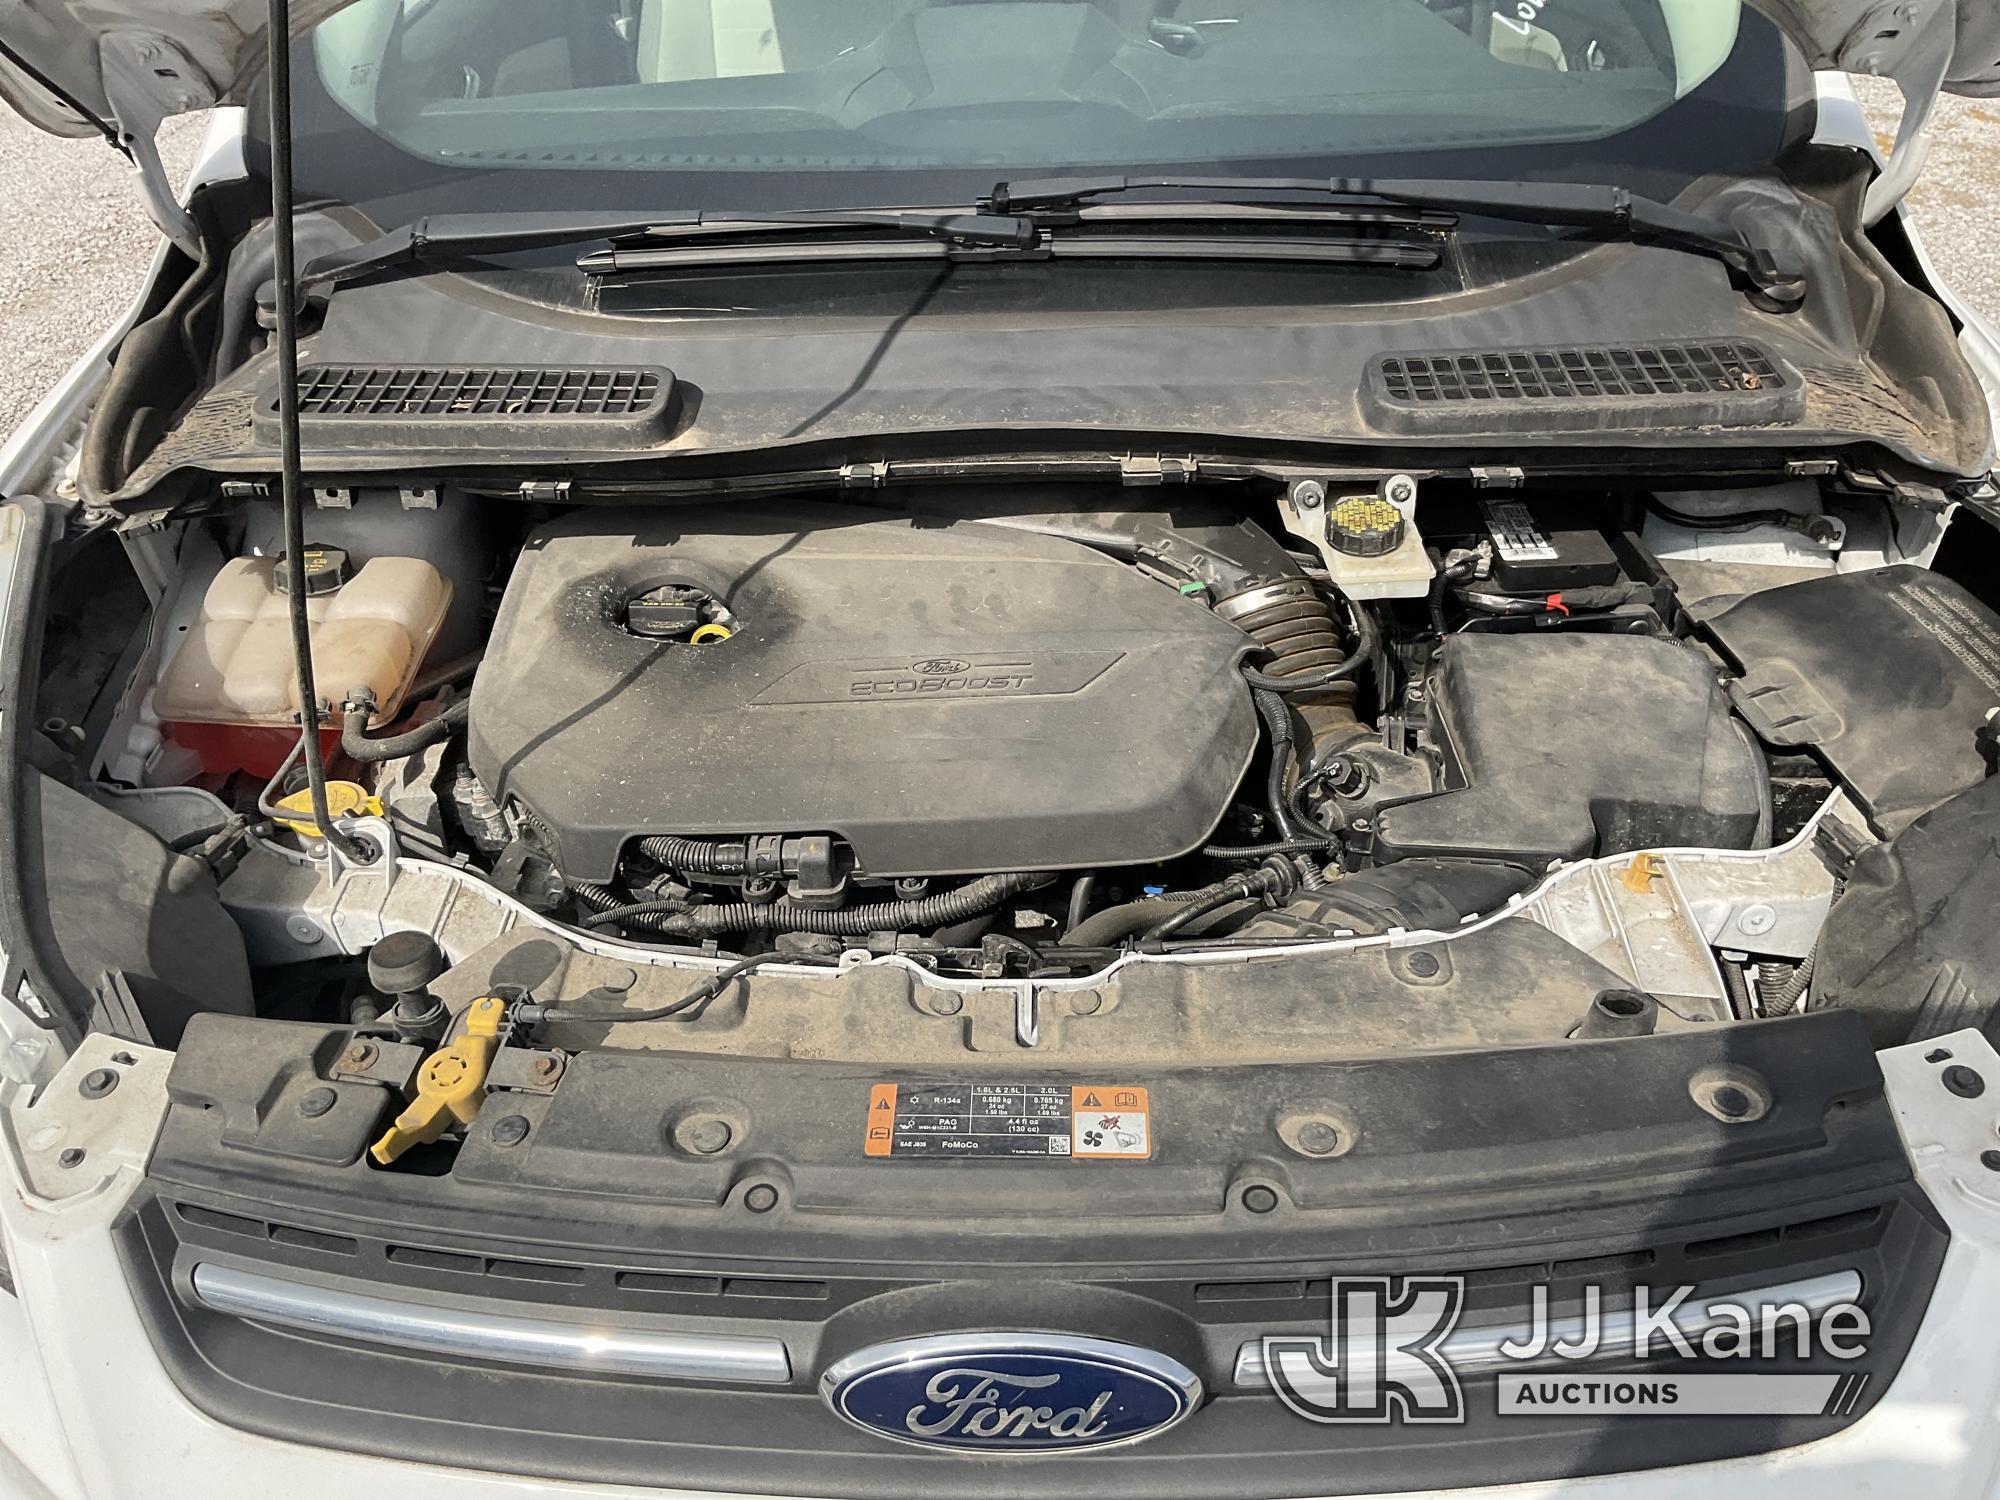 (Verona, KY) 2014 Ford Escape 4x4 4-Door Sport Utility Vehicle Runs & Moves) (Check Engine Light On)